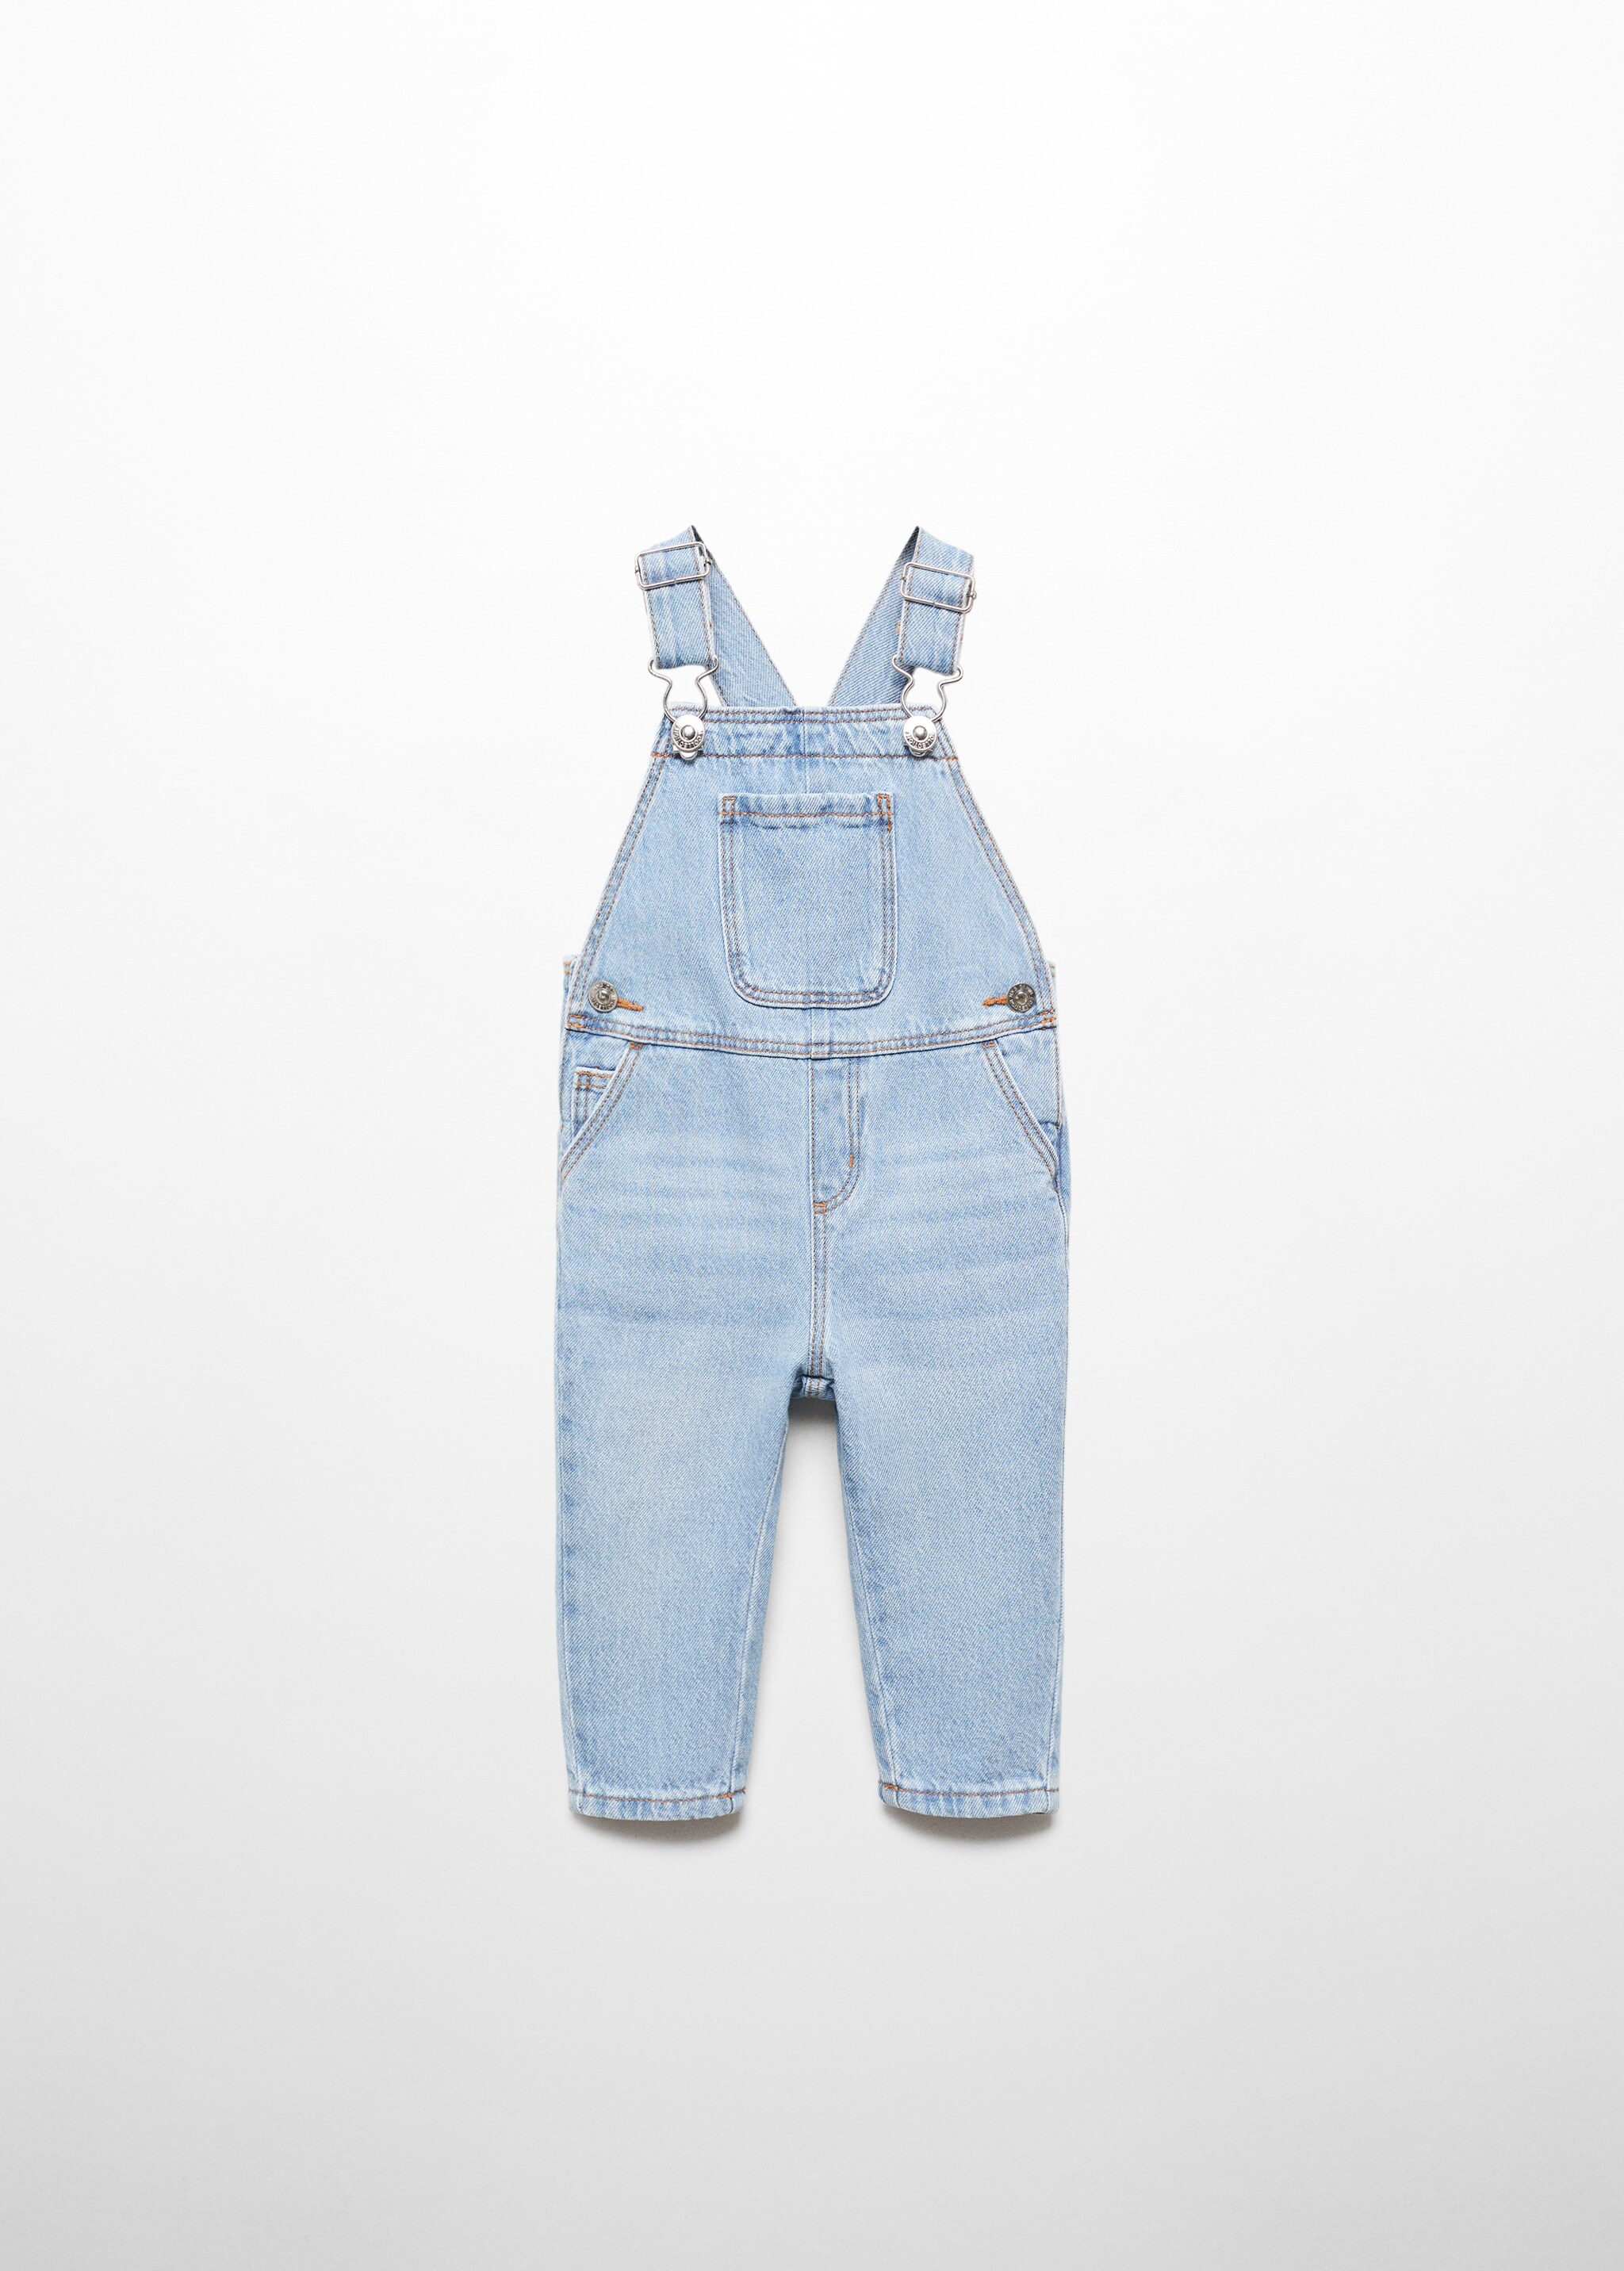 Long denim dungarees - Article without model